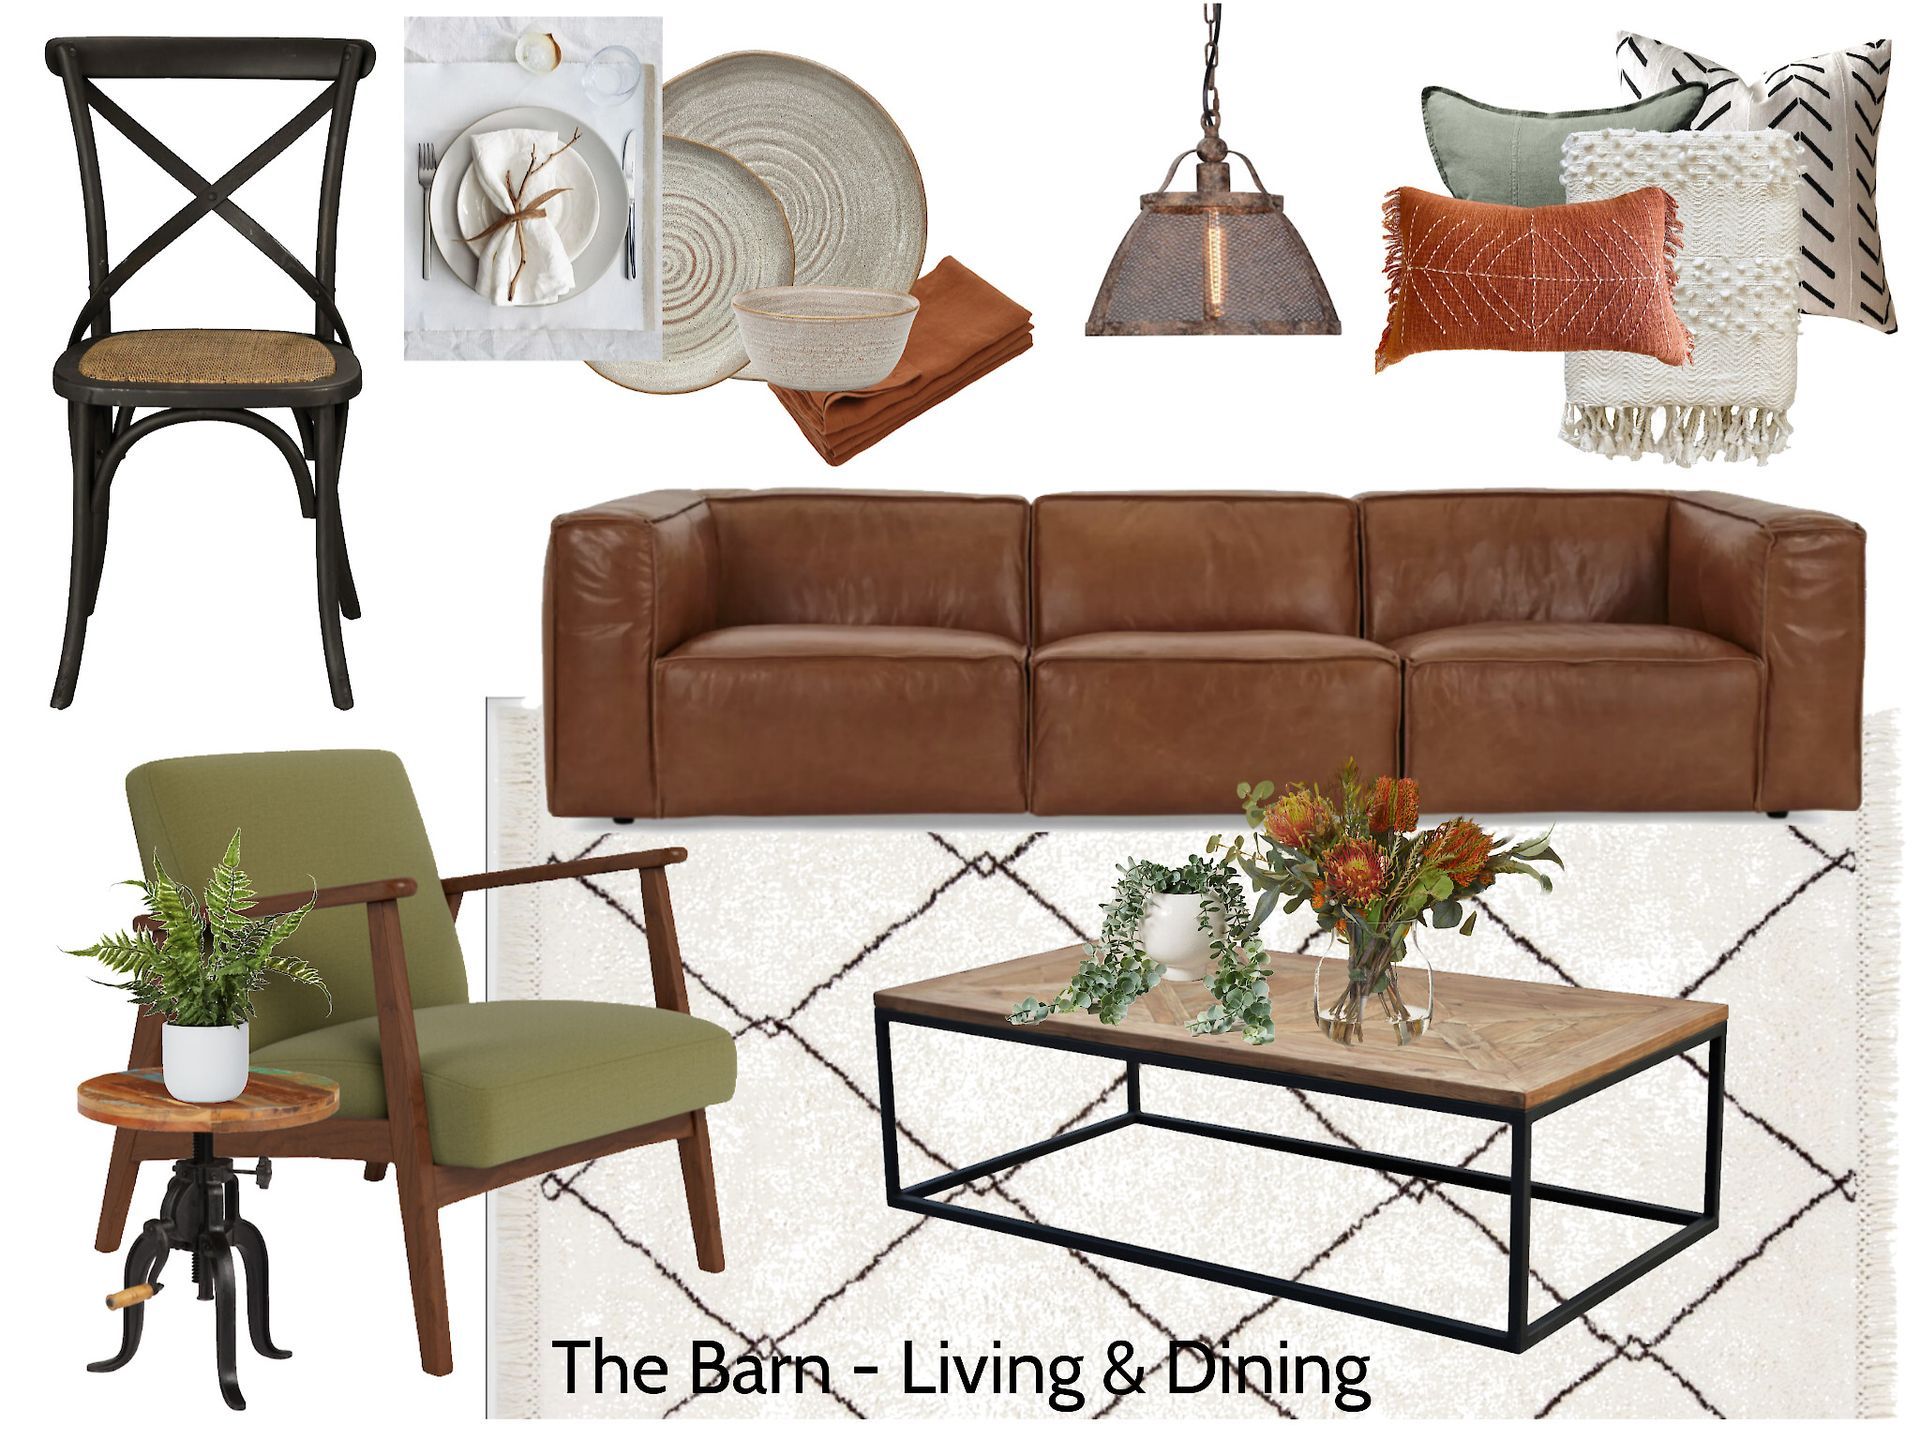 A living room with a brown leather couch and green chairs